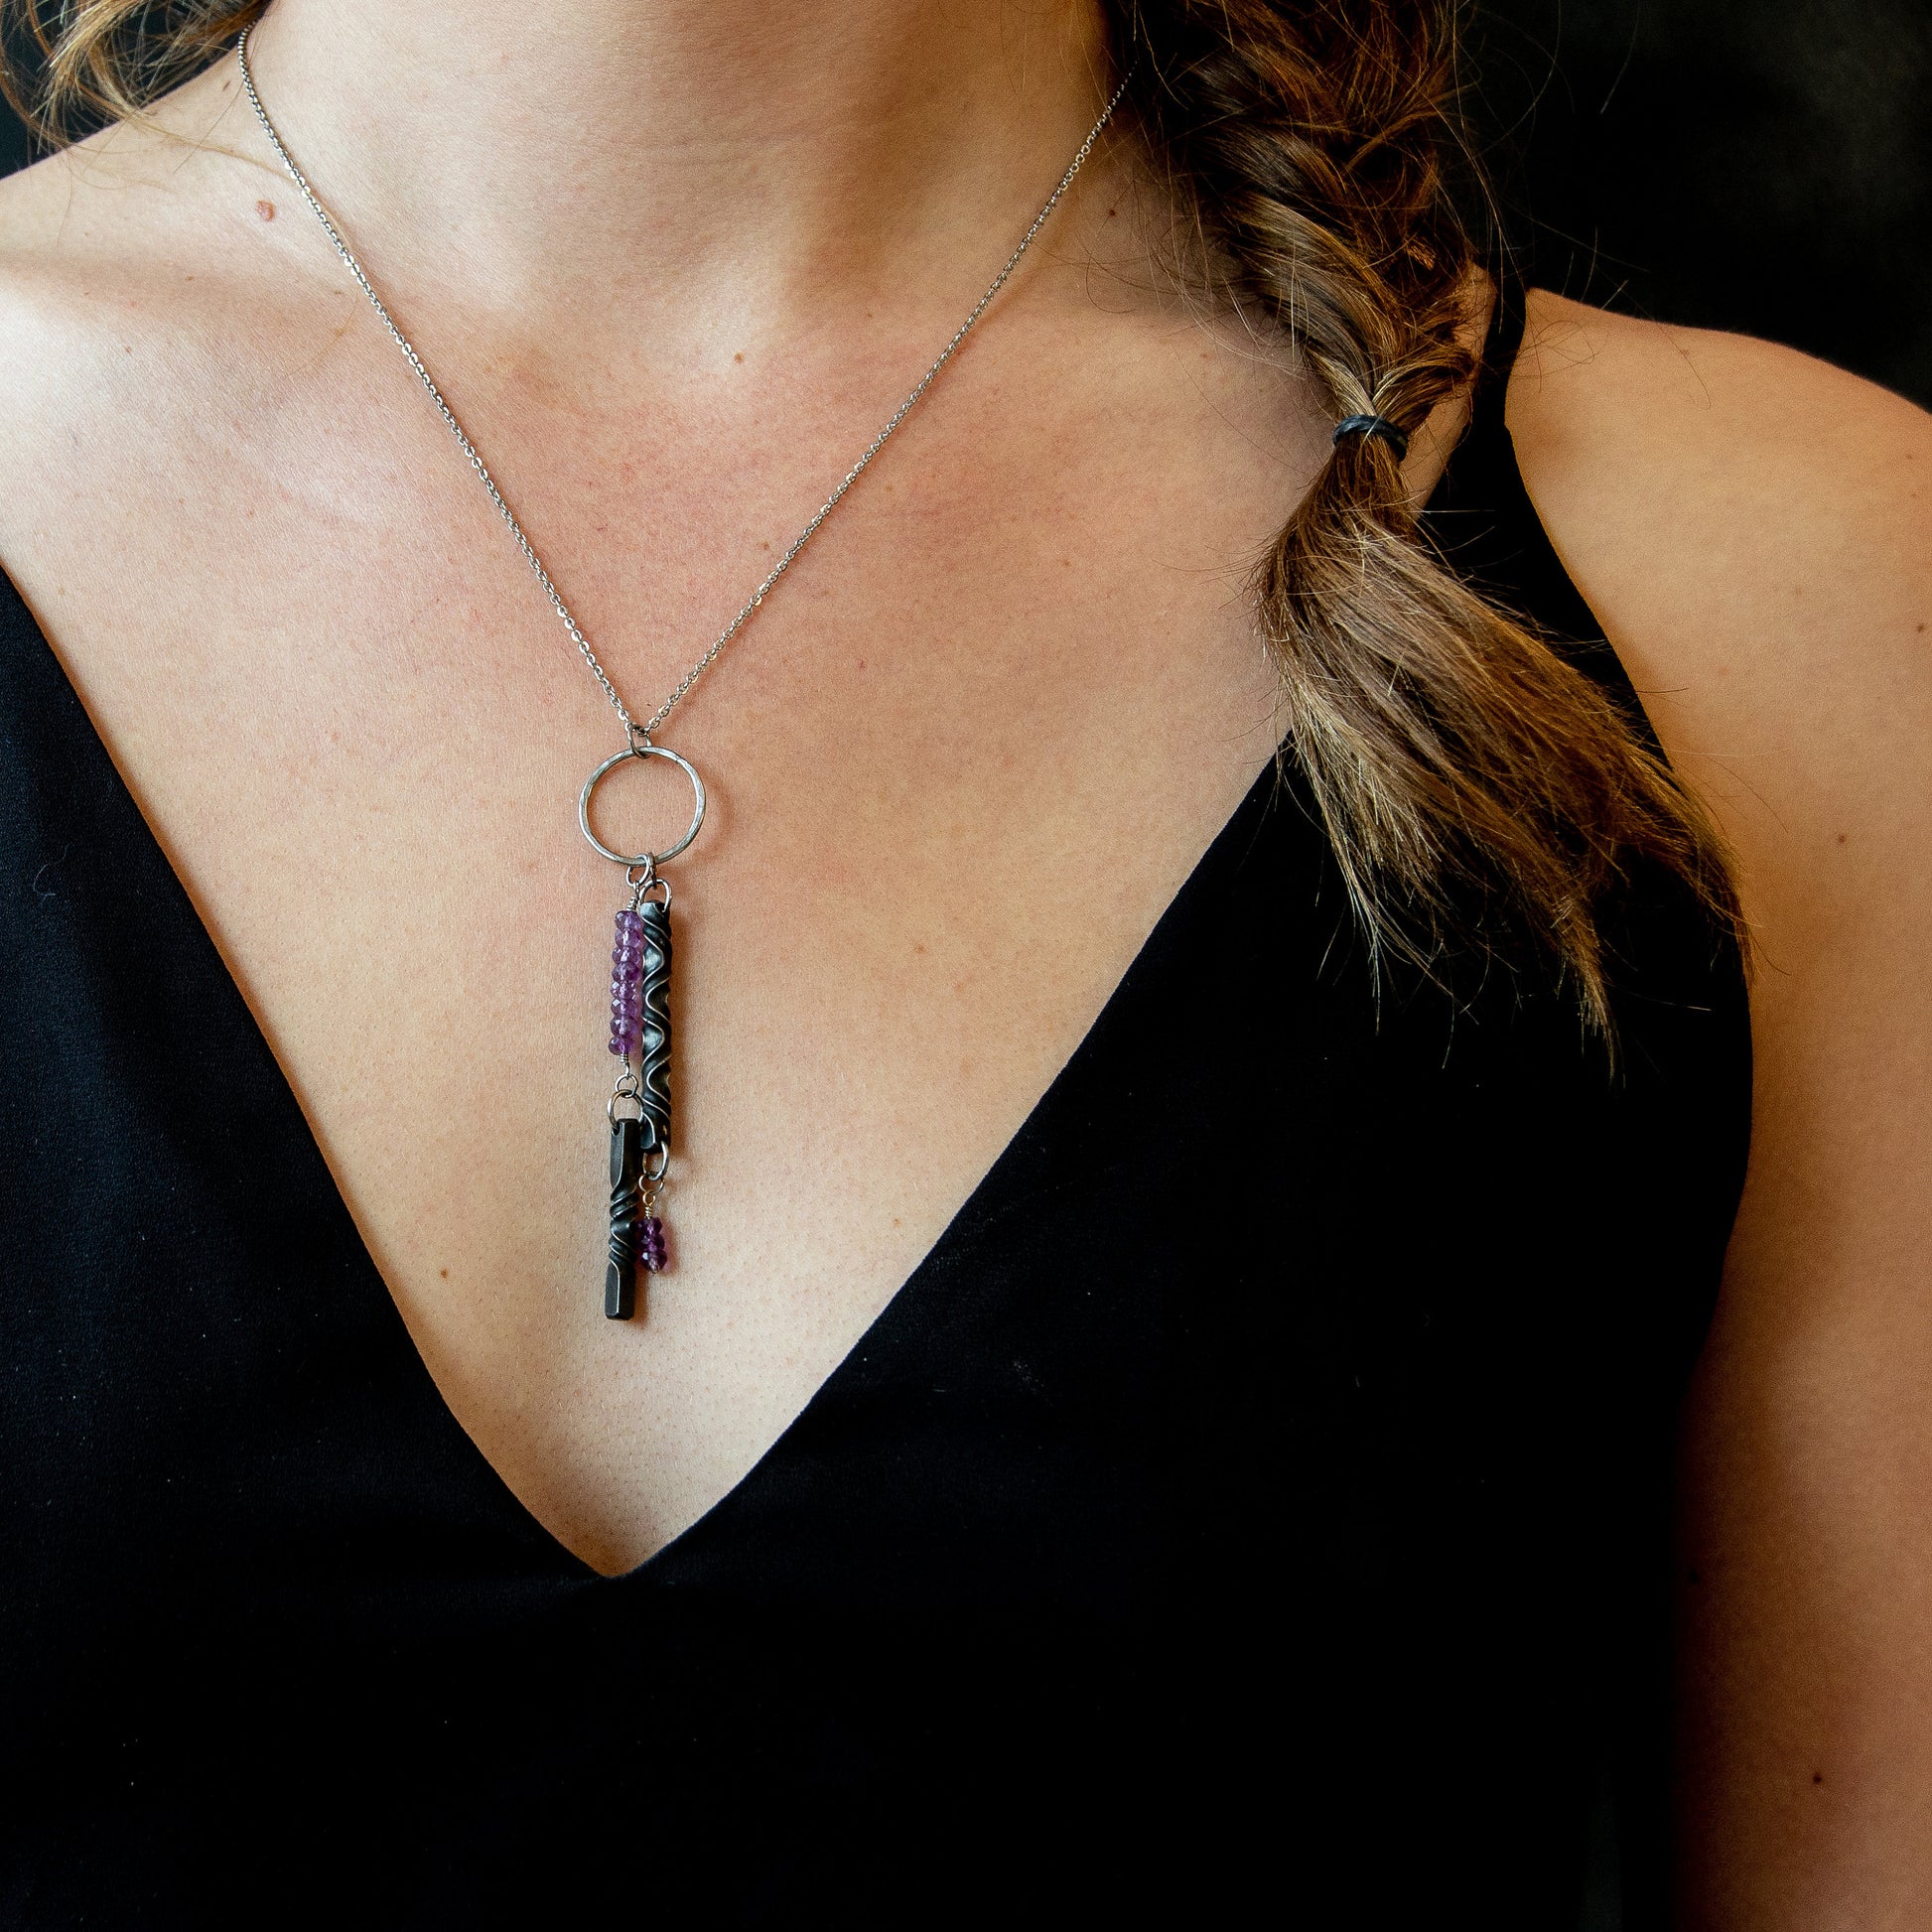 Iron and amethyst necklace - 6th anniversary gift for her - iron anniversary - hand forged by blacksmith